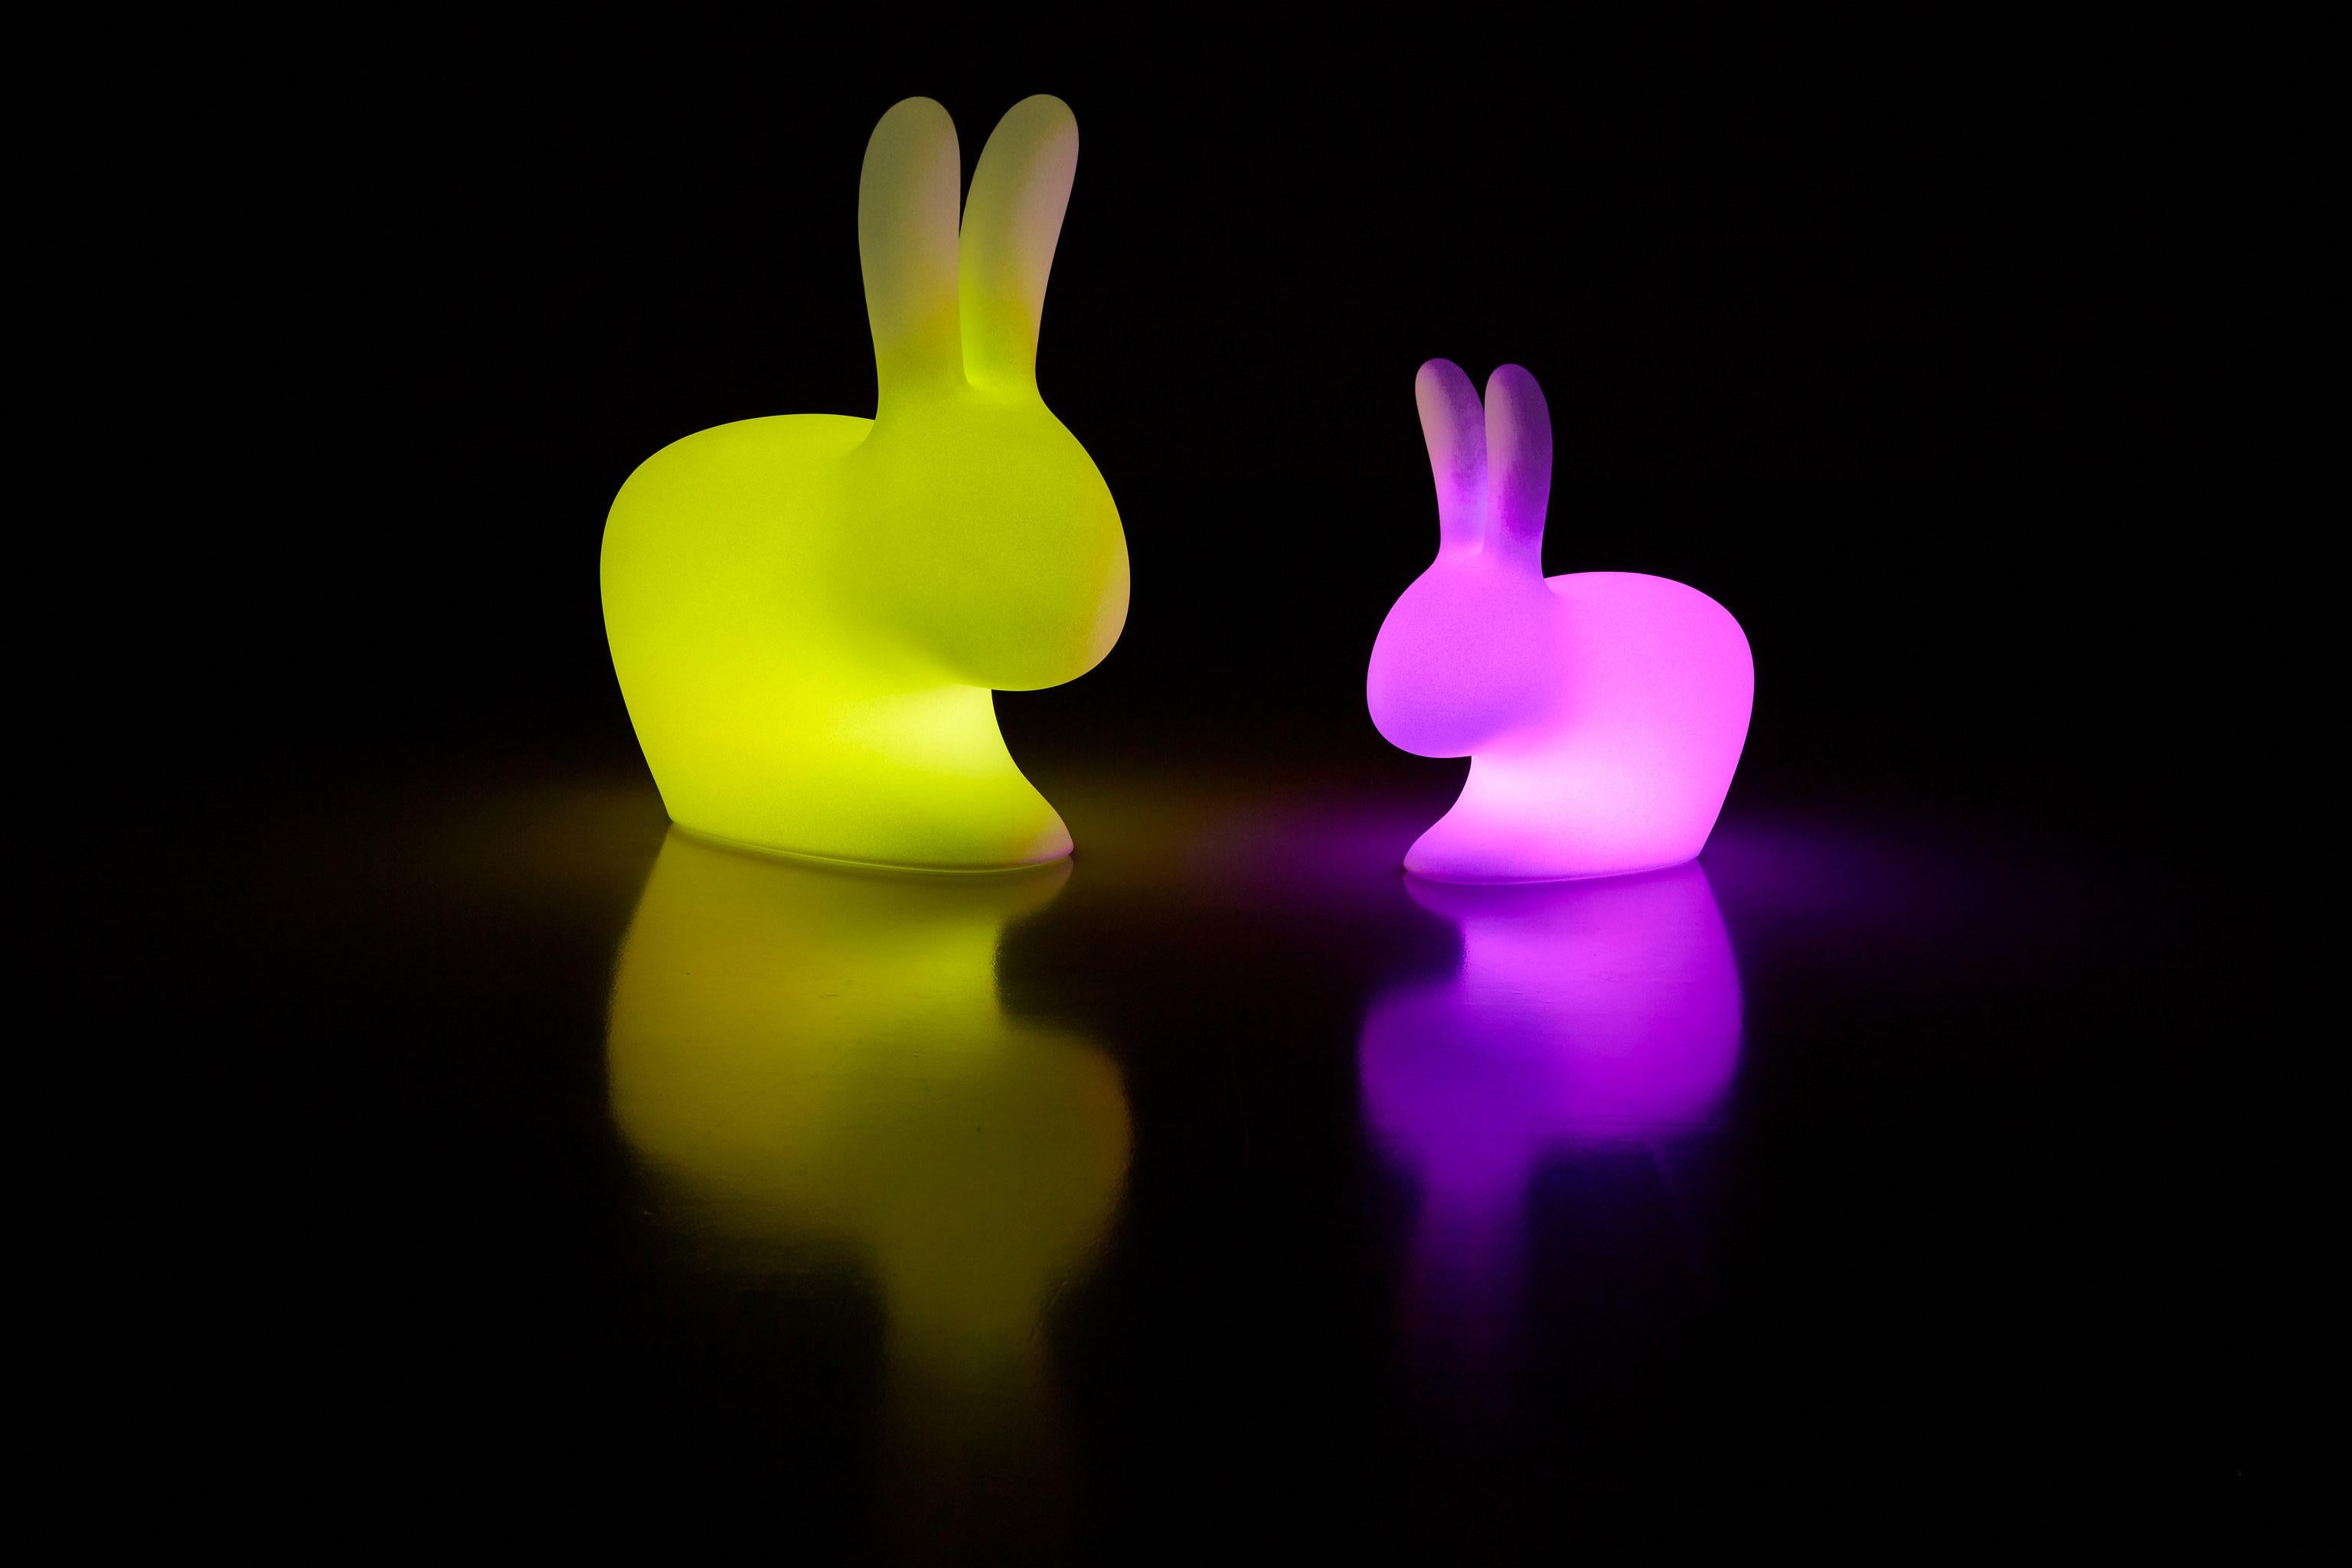 Italian In Stock in Los Angeles, Baby Rabbit Chair LED Lamp by Stefano Giovannoni